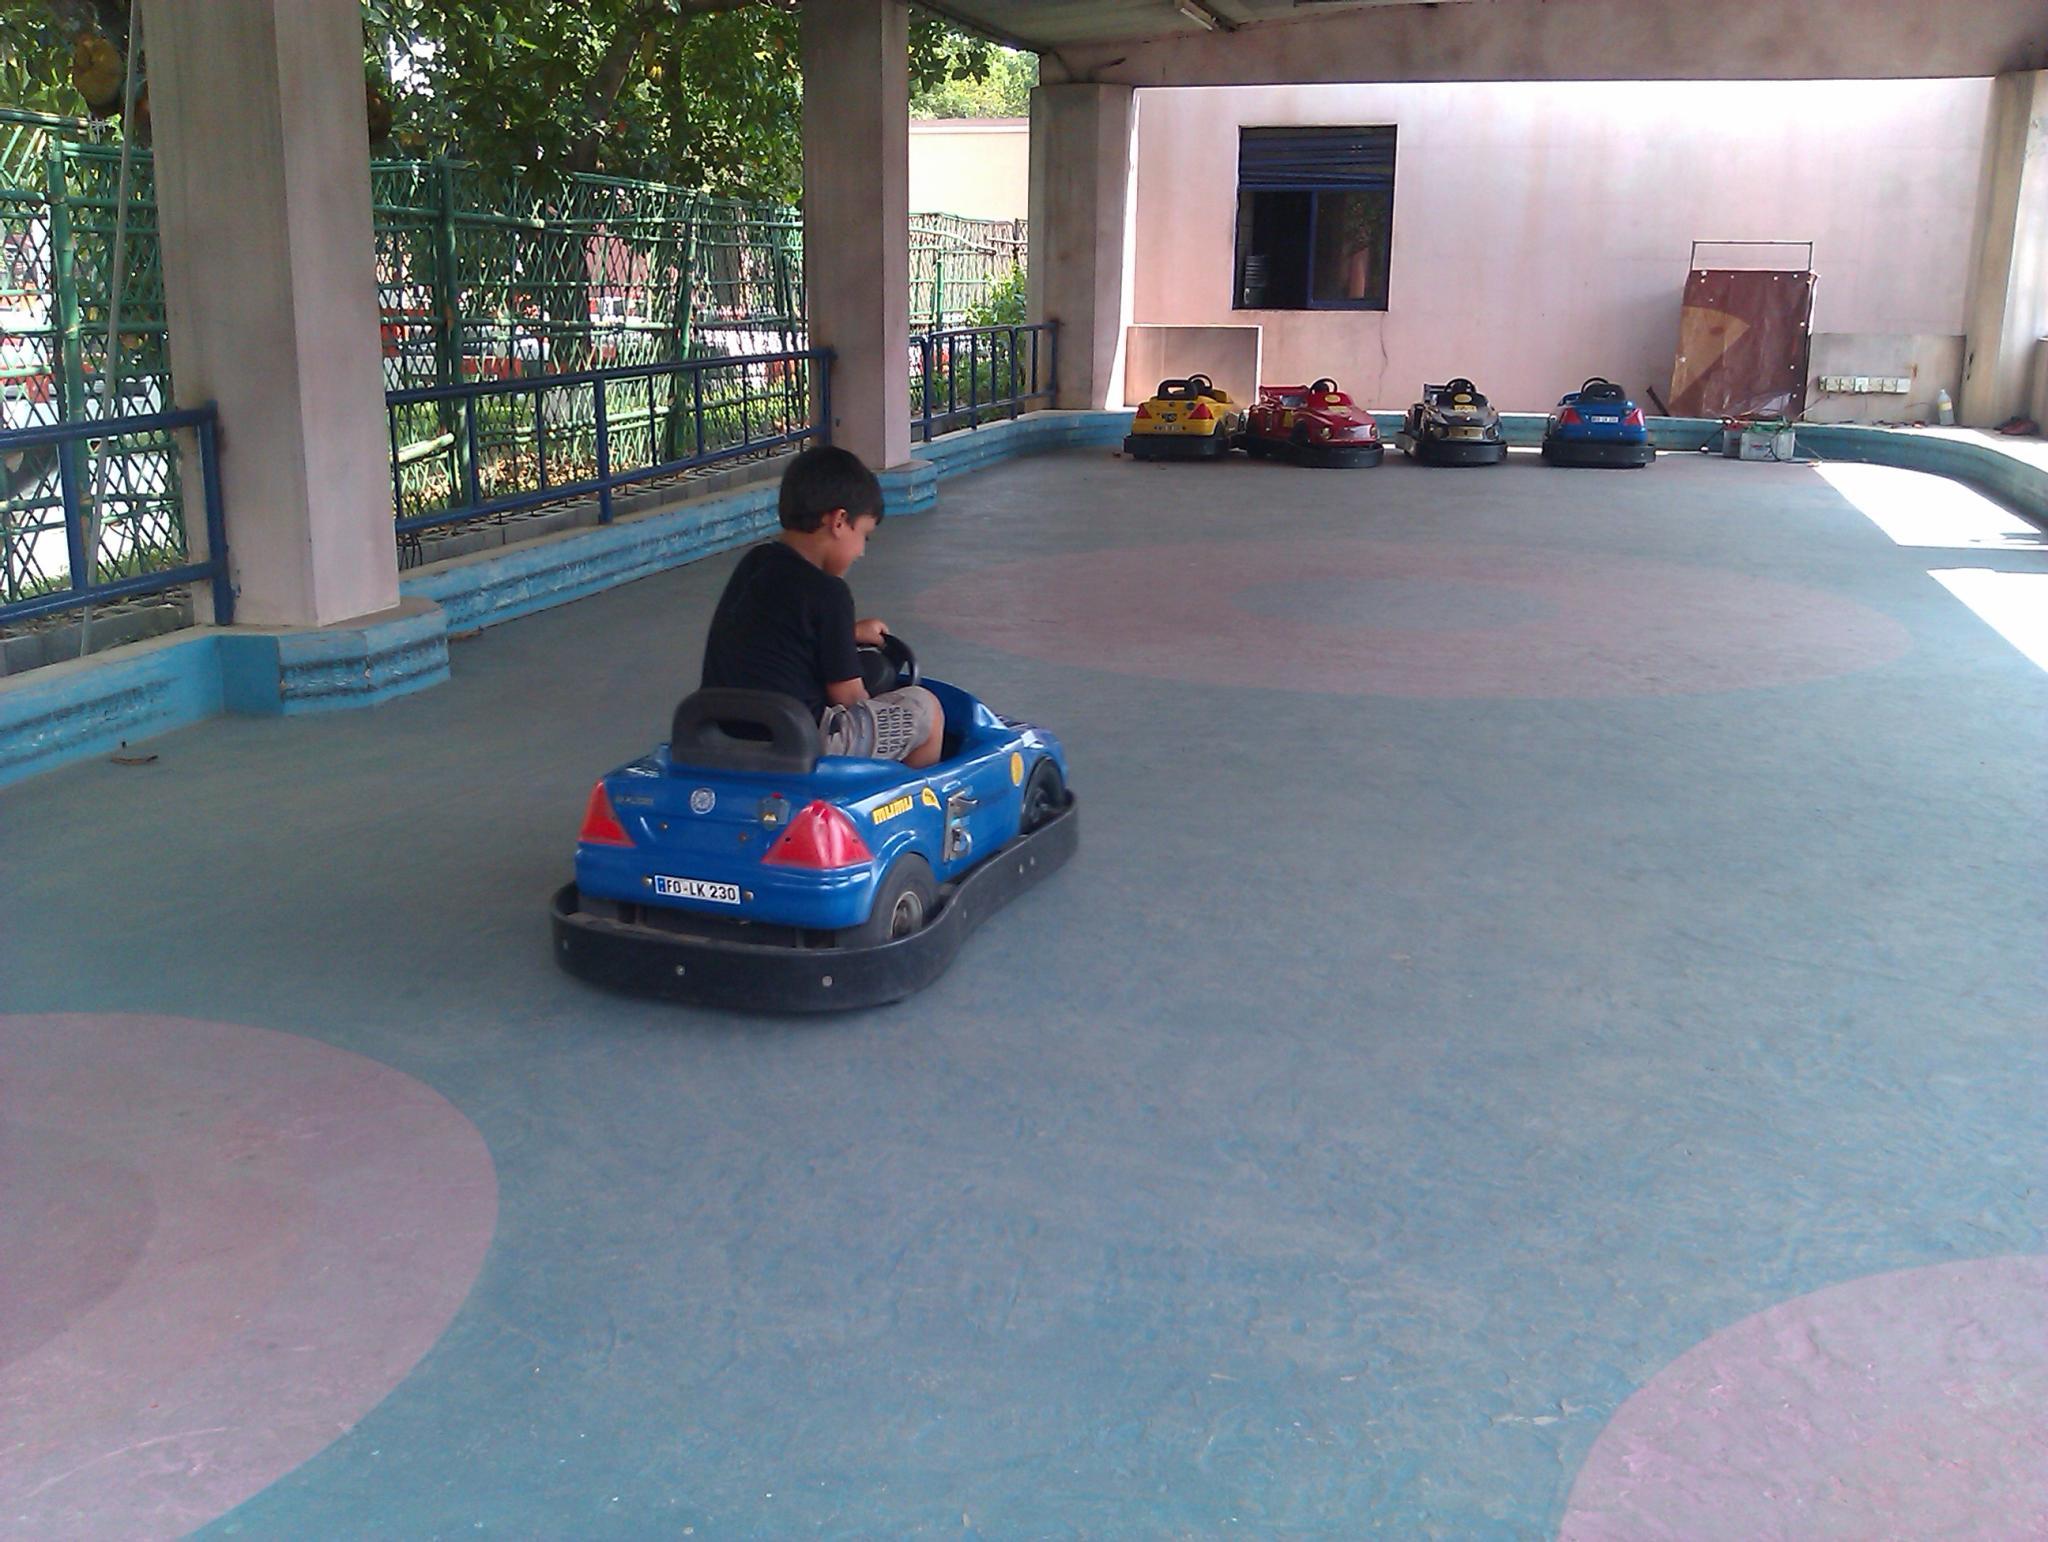 a child is riding on a toy car